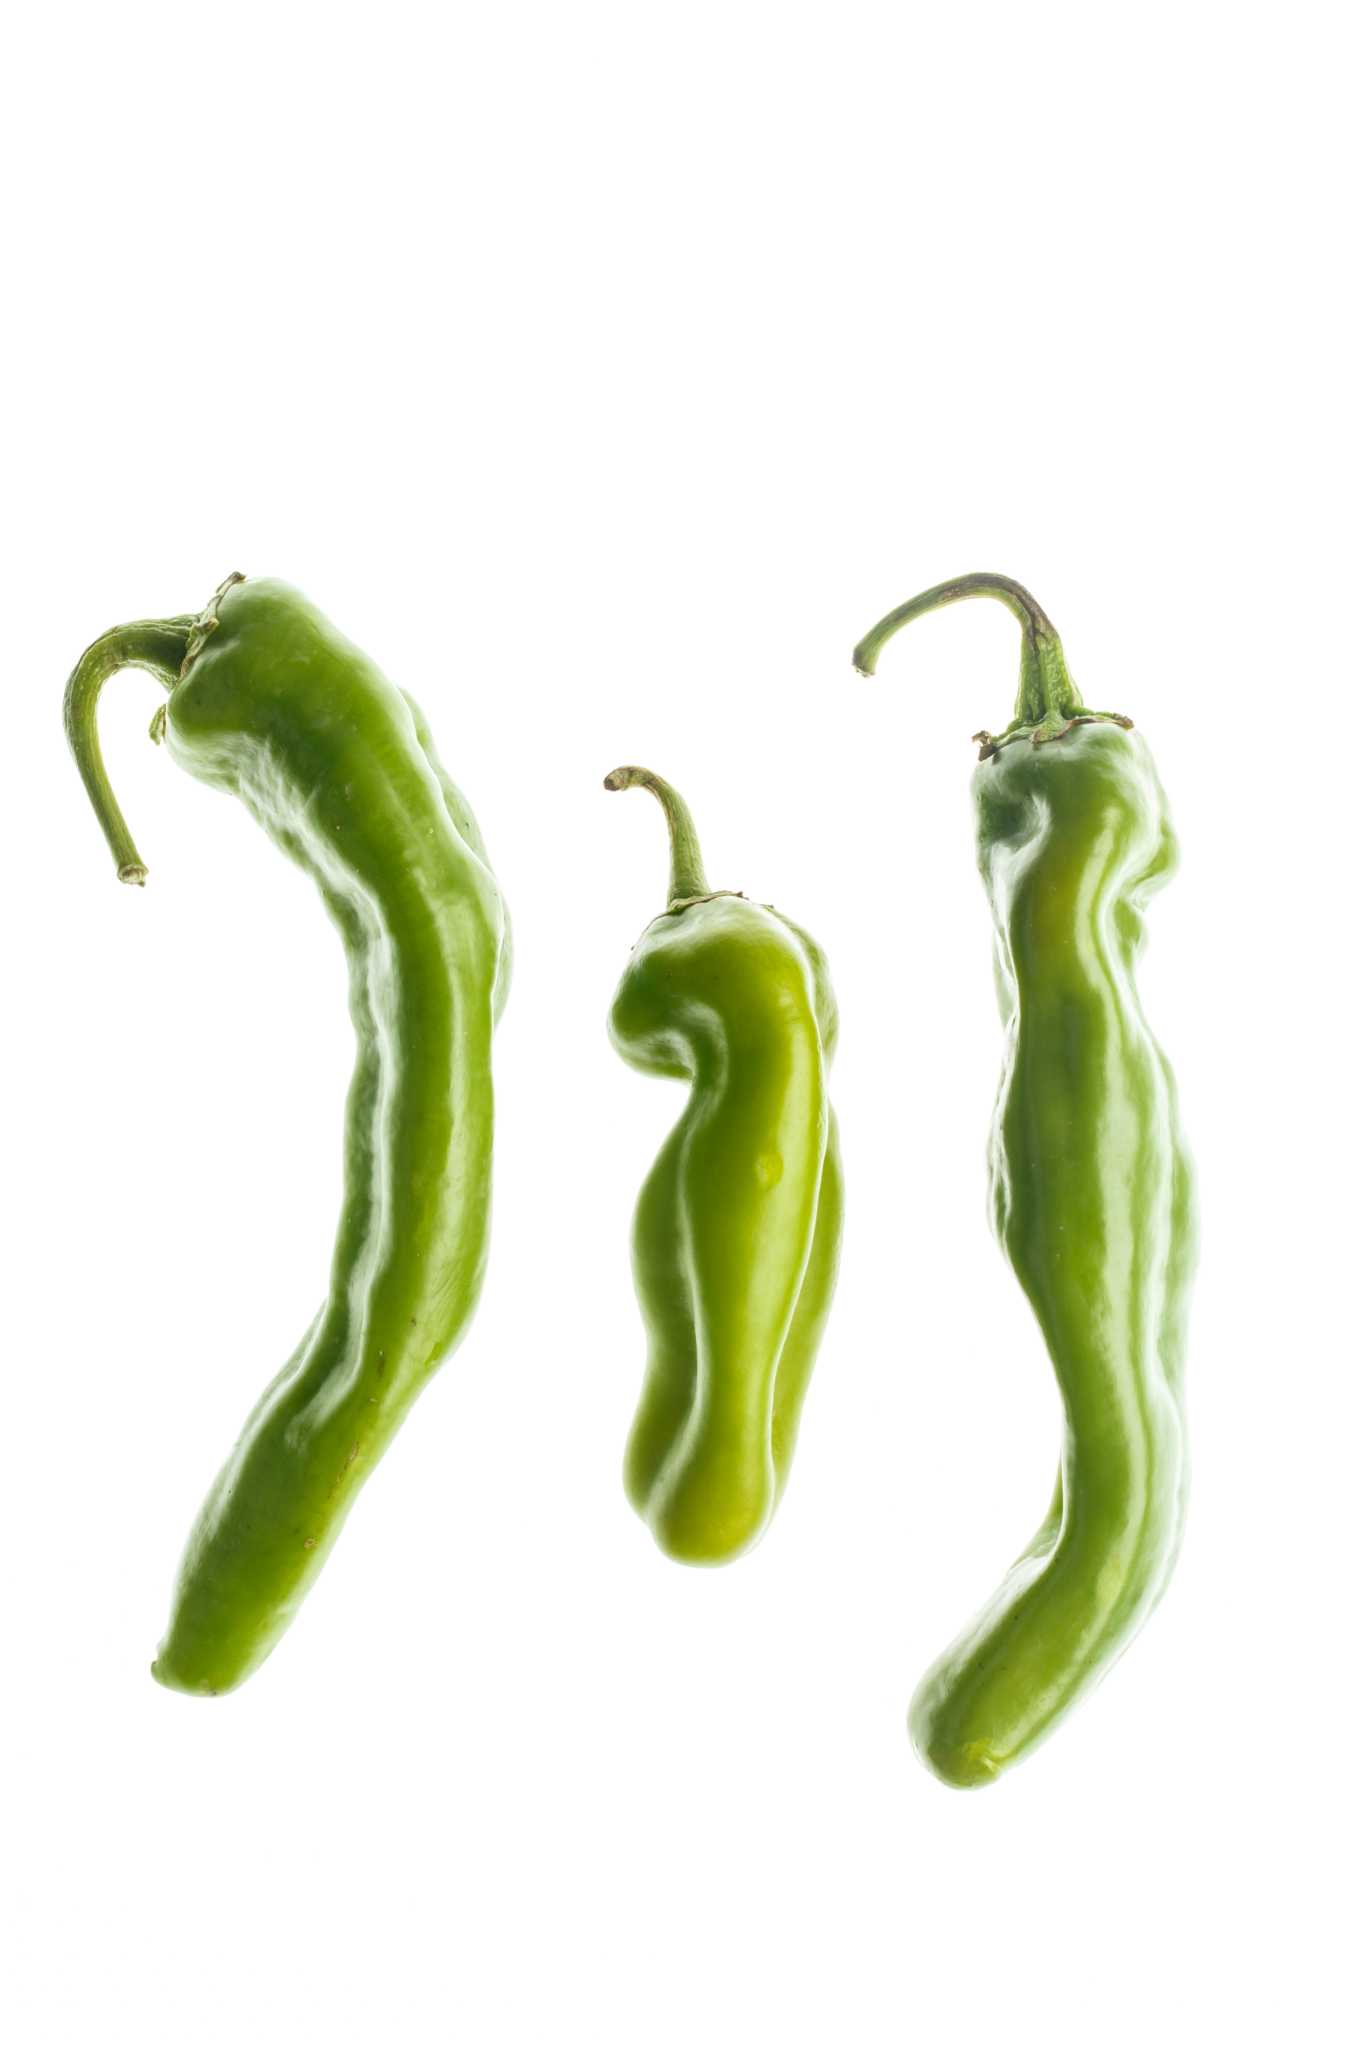 Hatch chile roasting events in the Bay Area